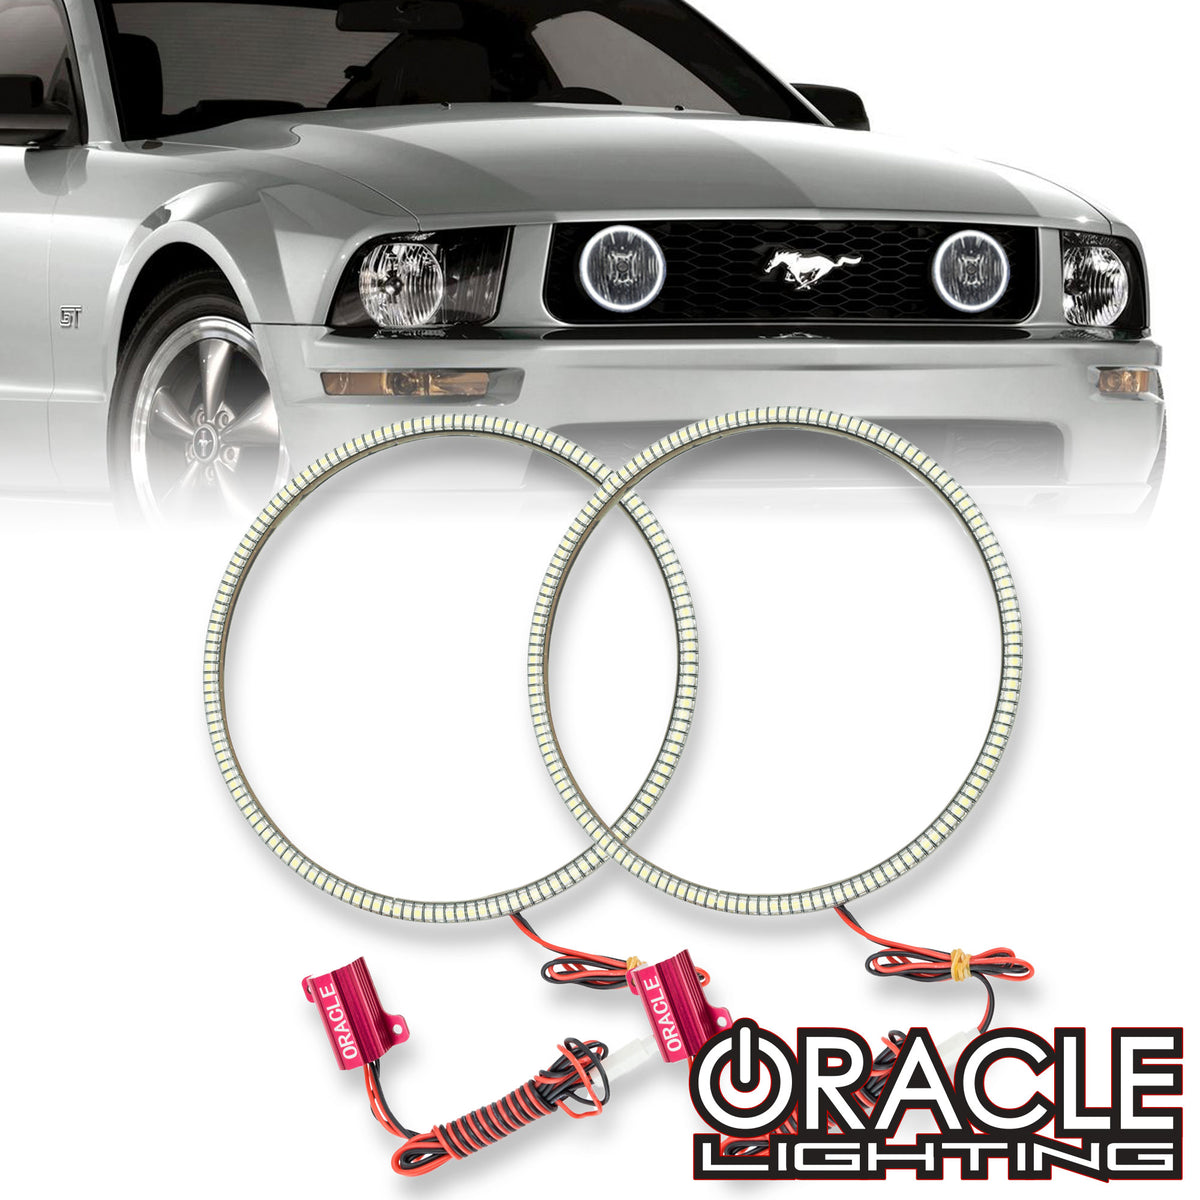 ORACLE Lighting 2005-2009 Ford Mustang GT Grill Fog Light Halo Kit